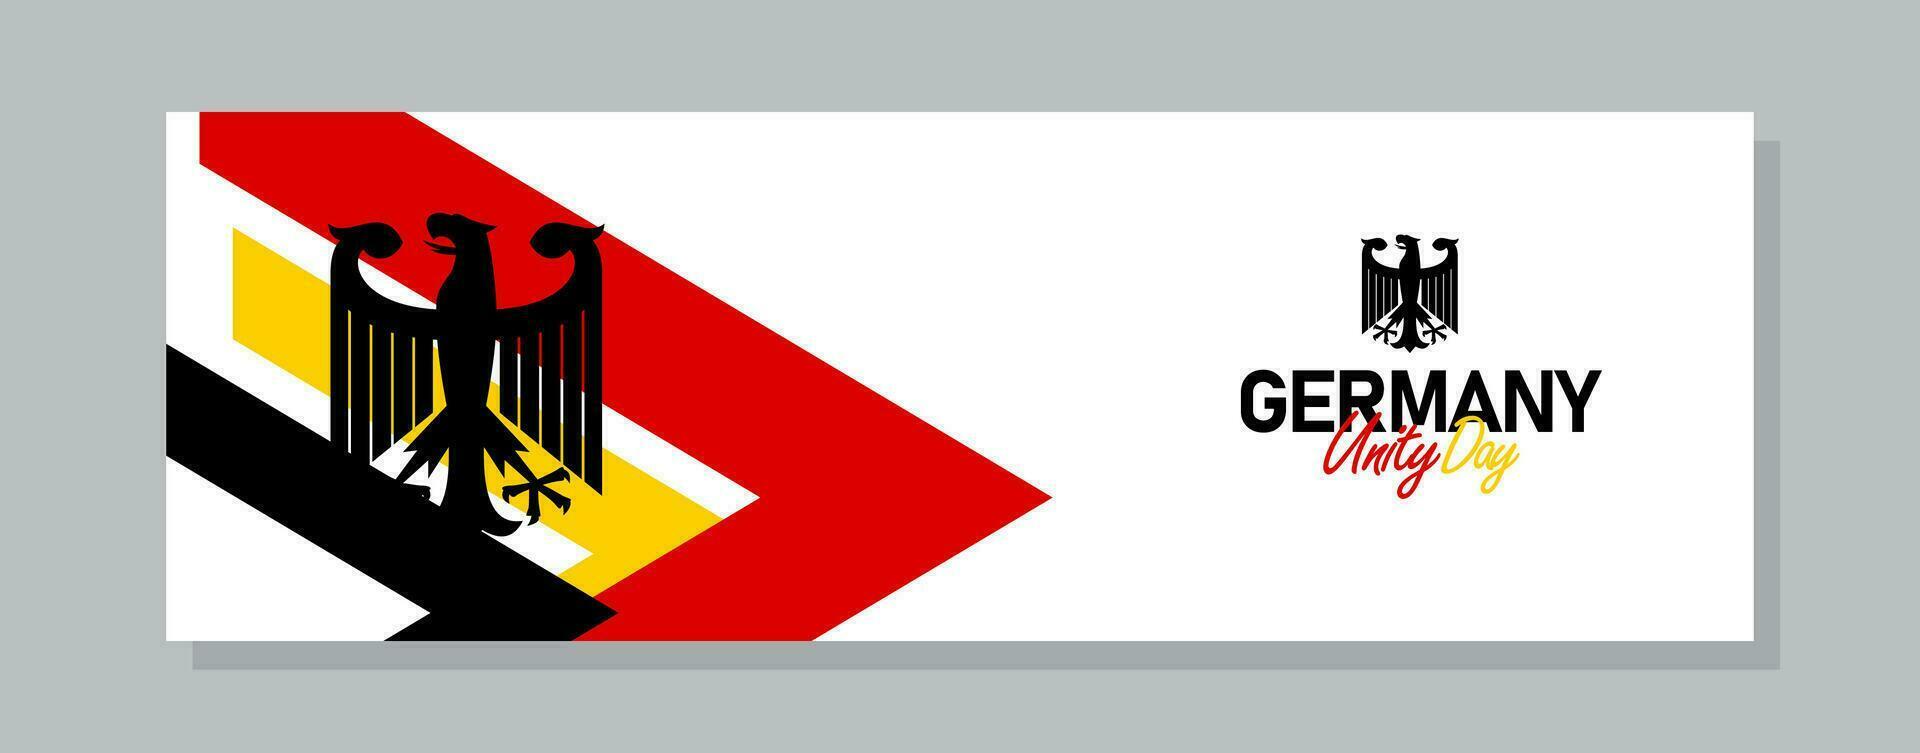 Happy german unity day of Germany. banner background. Classic national country flag with Abstract geometric flag. vector